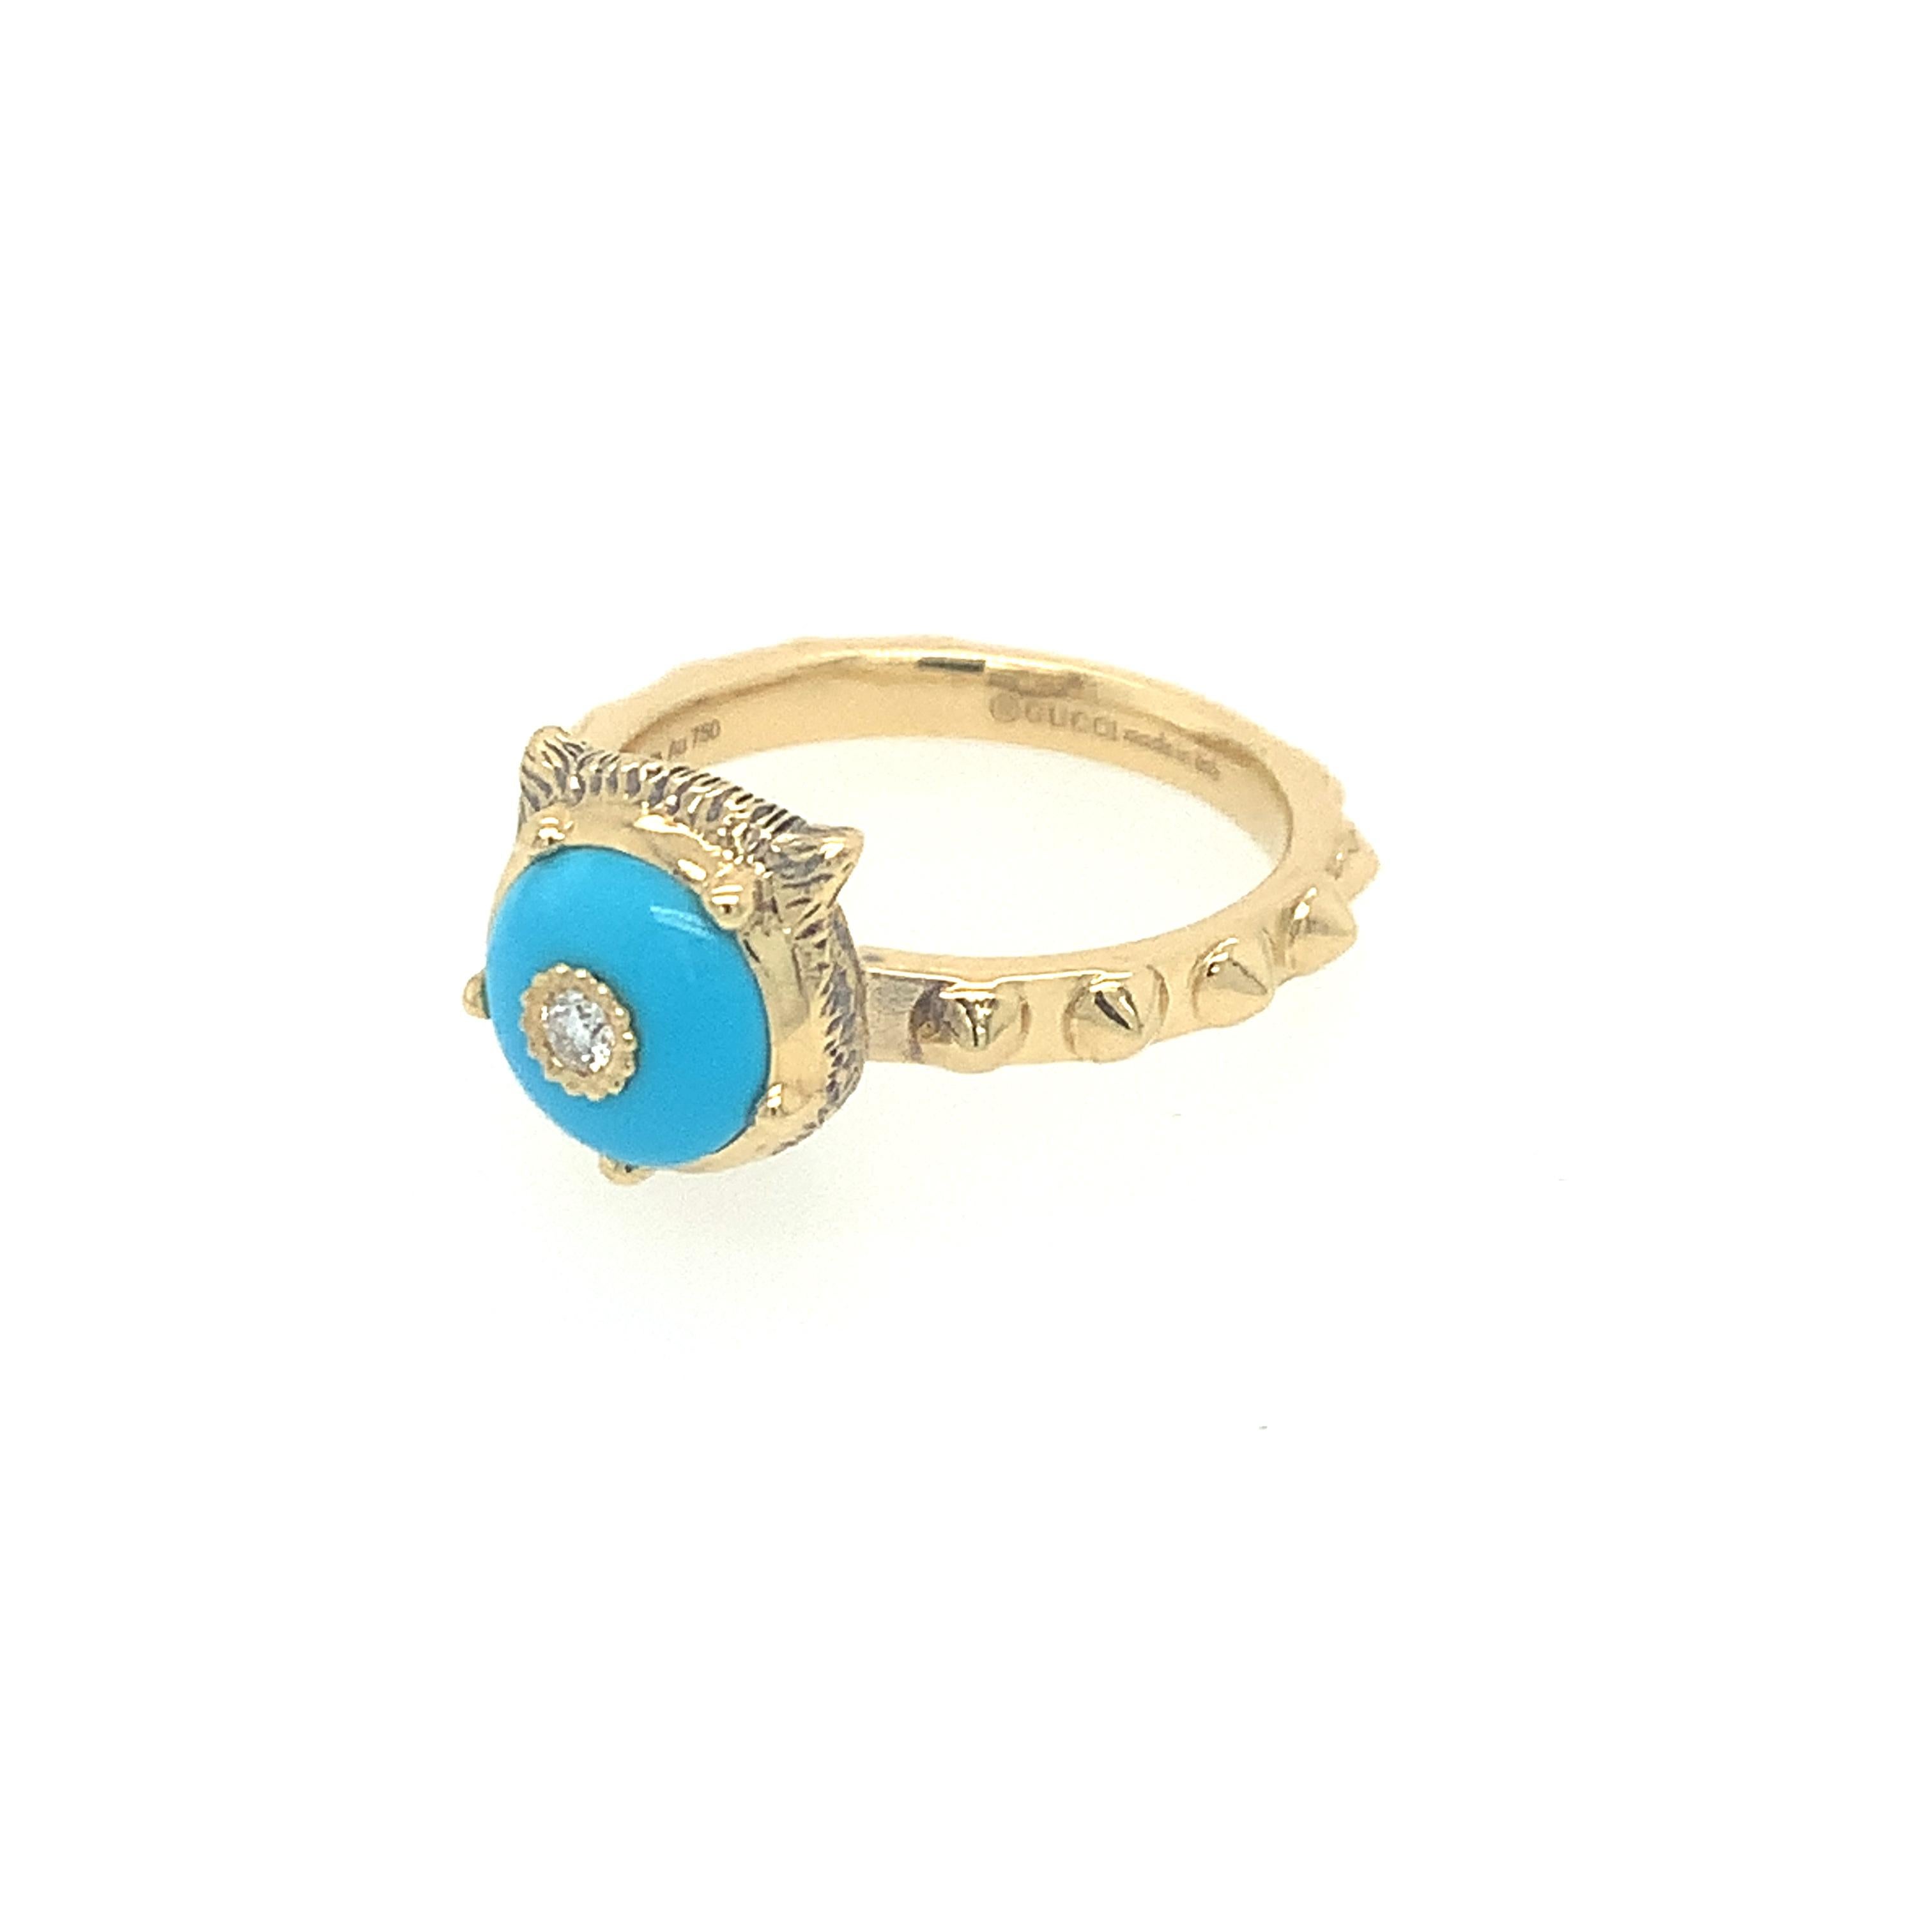 Defined by the feline head motif, this 18K yellow gold Le Marche des Merveilles ring is truly unique with a turquoise stone and brilliant cut diamond at its center. When worn, the feline face is hidden, but when removed, the detailed face with